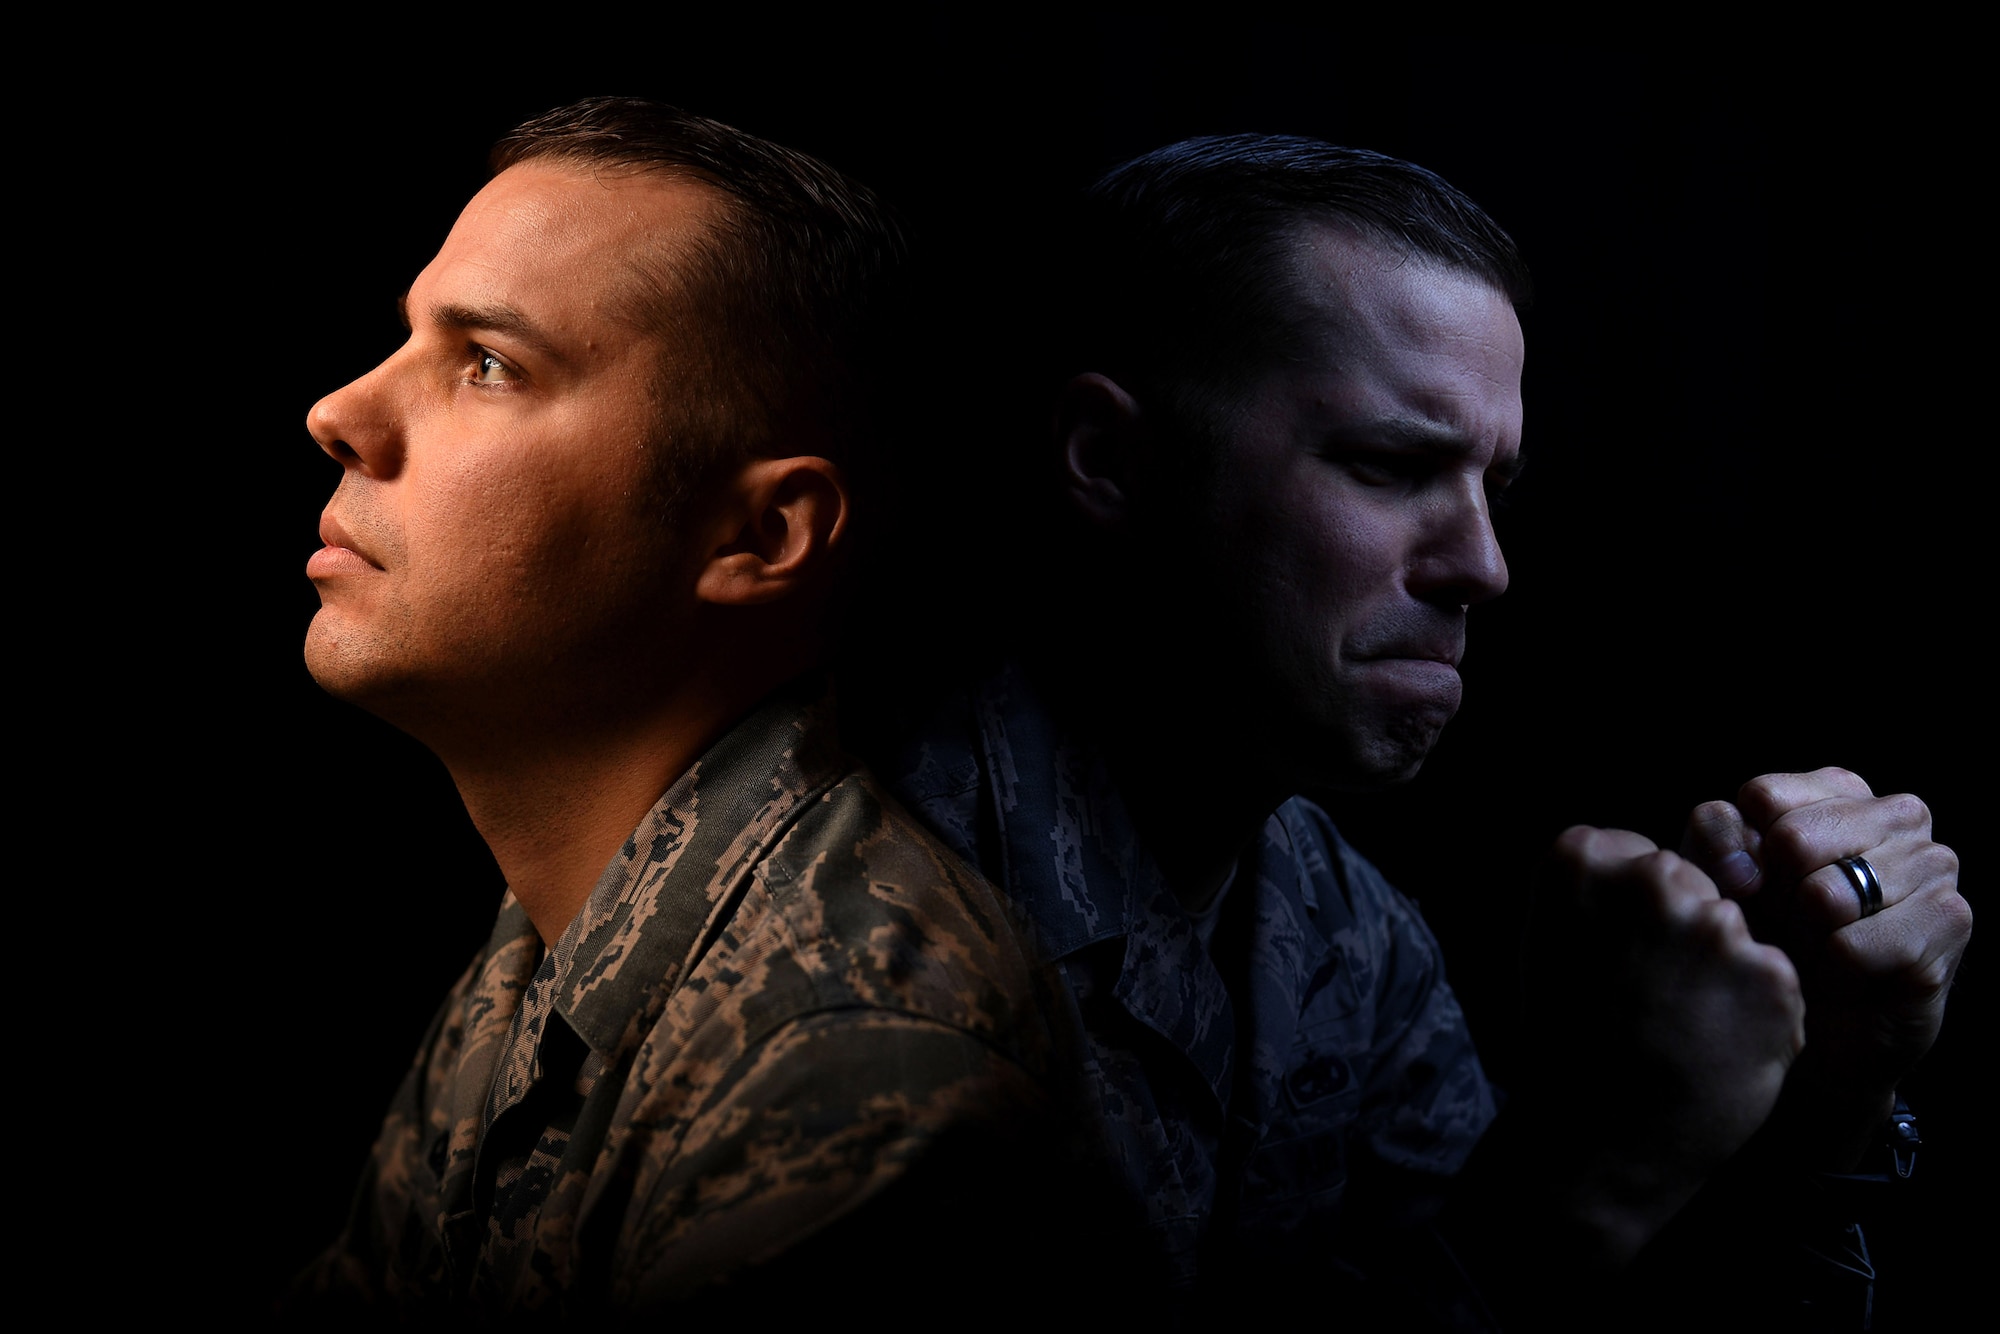 Tech. Sgt. Lloyd, 22nd Attack Squadron sensor operator, poses for an illustrative photo for National Suicide Prevention Awareness month Sept. 14, 2017, at Creech Air Force Base, Nev.